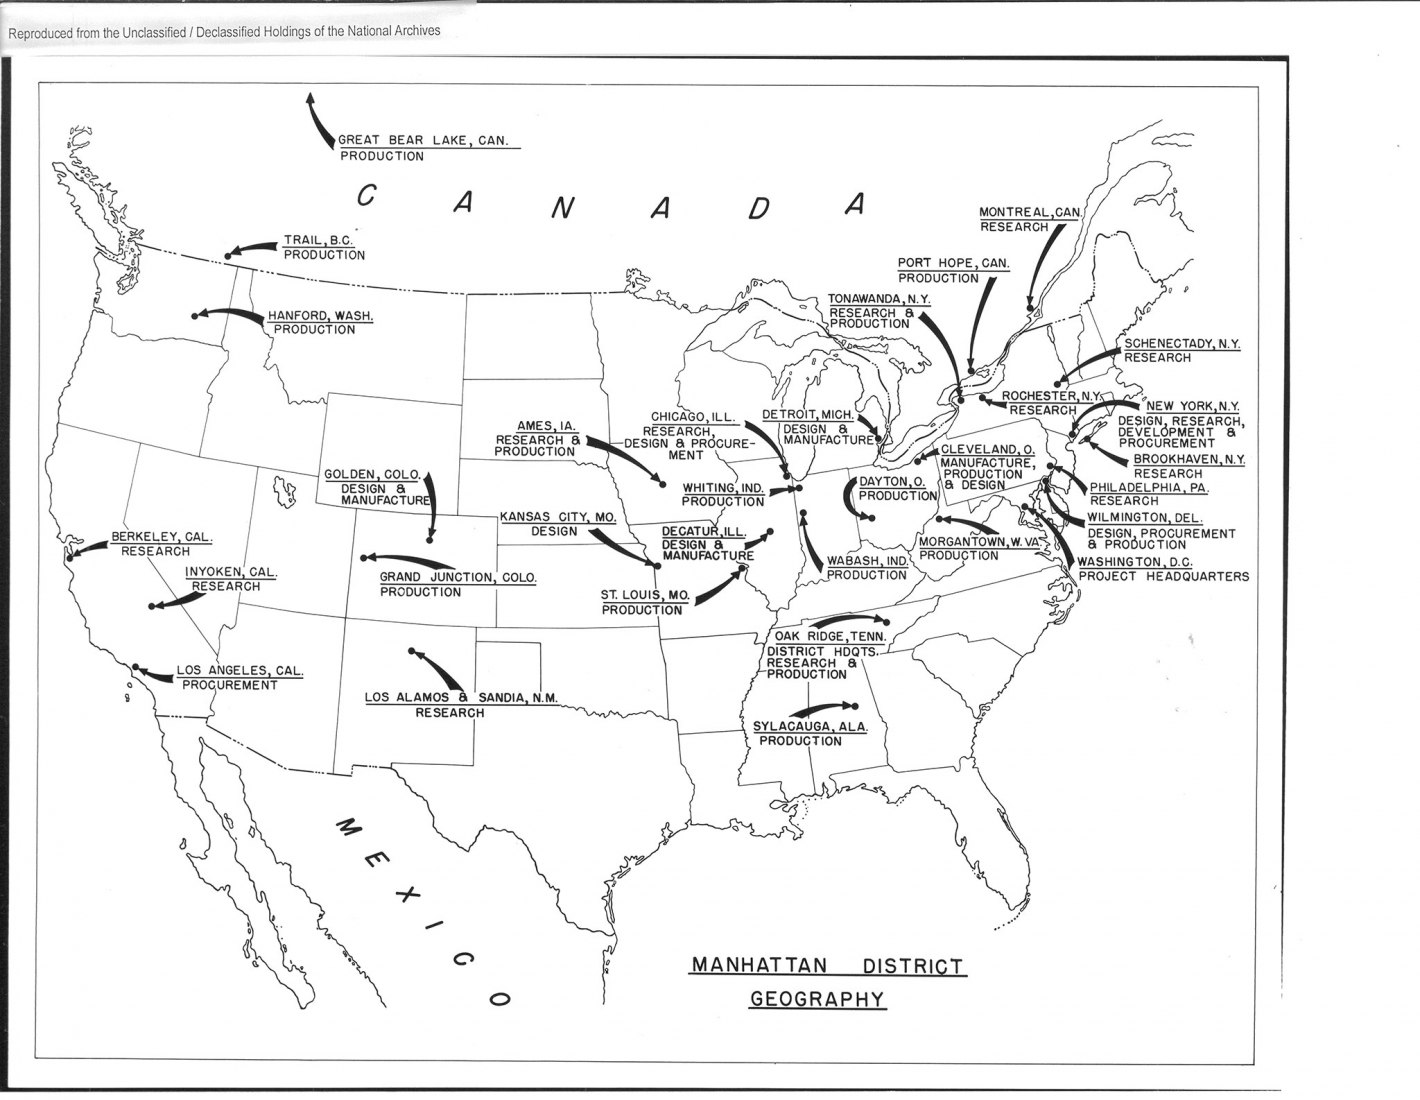 Map of the United States, showing key Manhattan Project sites. The Manhattan Project led to the construction of three entirely new cities from scratch: Oak Ridge, TN; Hanford/Richland, WA; and Los Alamos, NM. Related work took place at numerous other sites across the country and even in Canada. Courtesy of National Archives and Records Administration